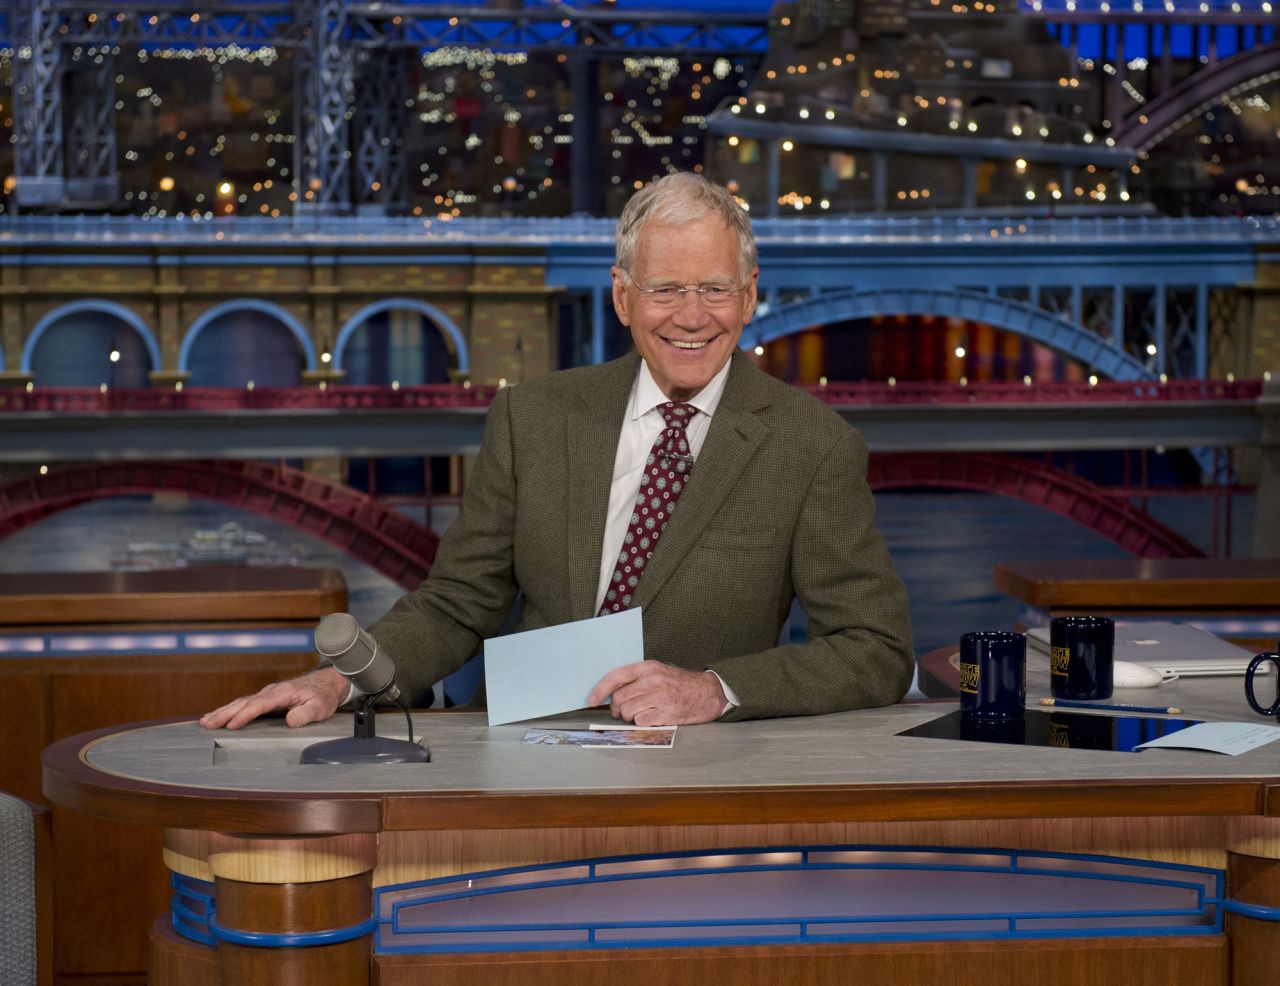 David Letterman was the Grand Old Man of Late Night -- but he's now left the stage (and desk, chair and mic combination) to his younger colleagues. He <a href="http://www.cnn.com/2015/05/21/entertainment/david-letterman-reaction-feat/">signed off May 20, 2015.</a>